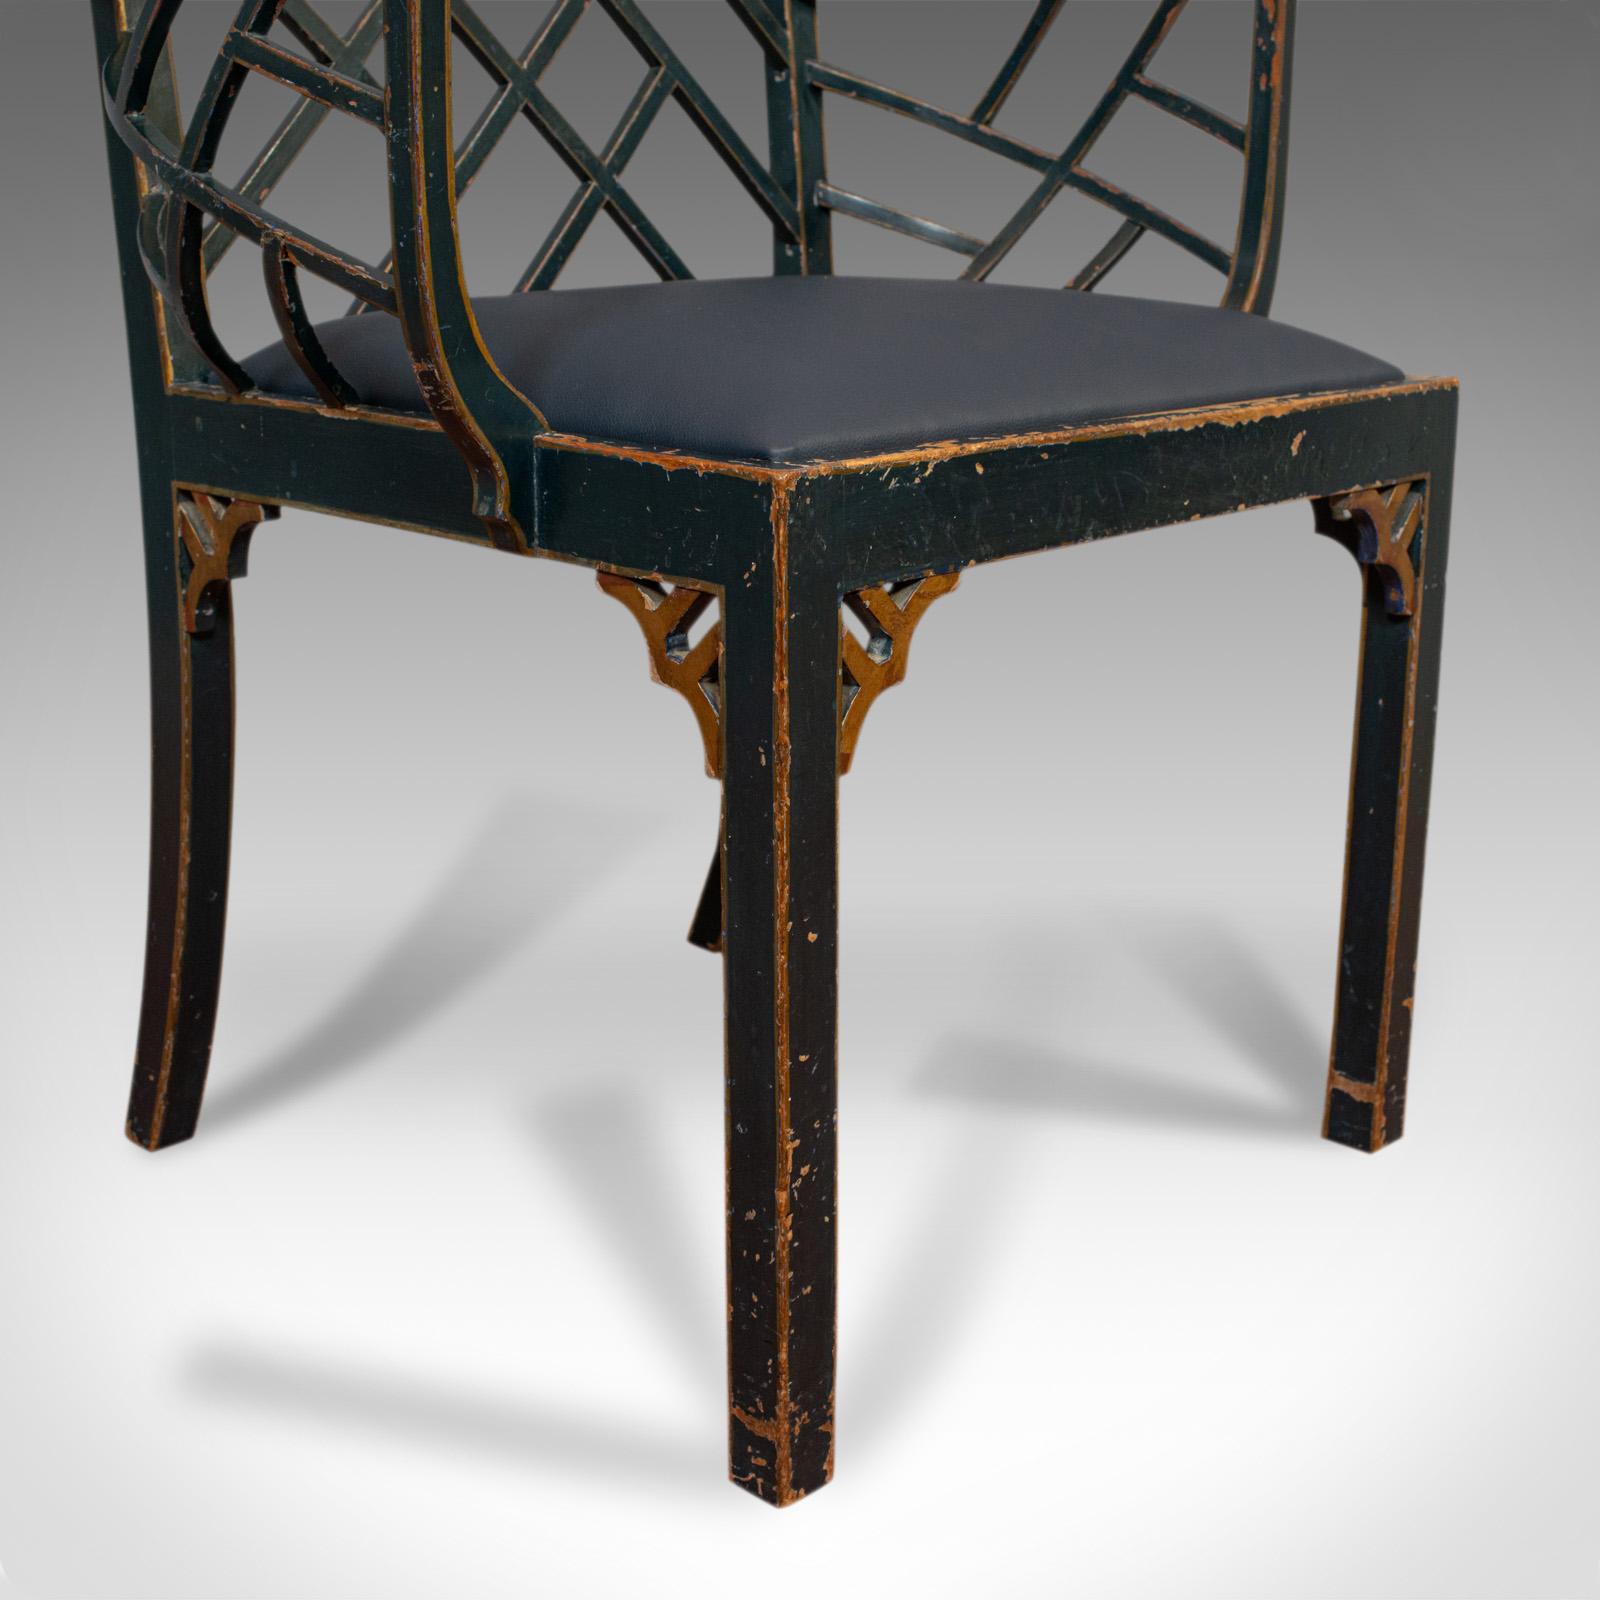 Antique Birdcage Elbow Chair, English, Painted, Leather, Regency, circa 1820 3